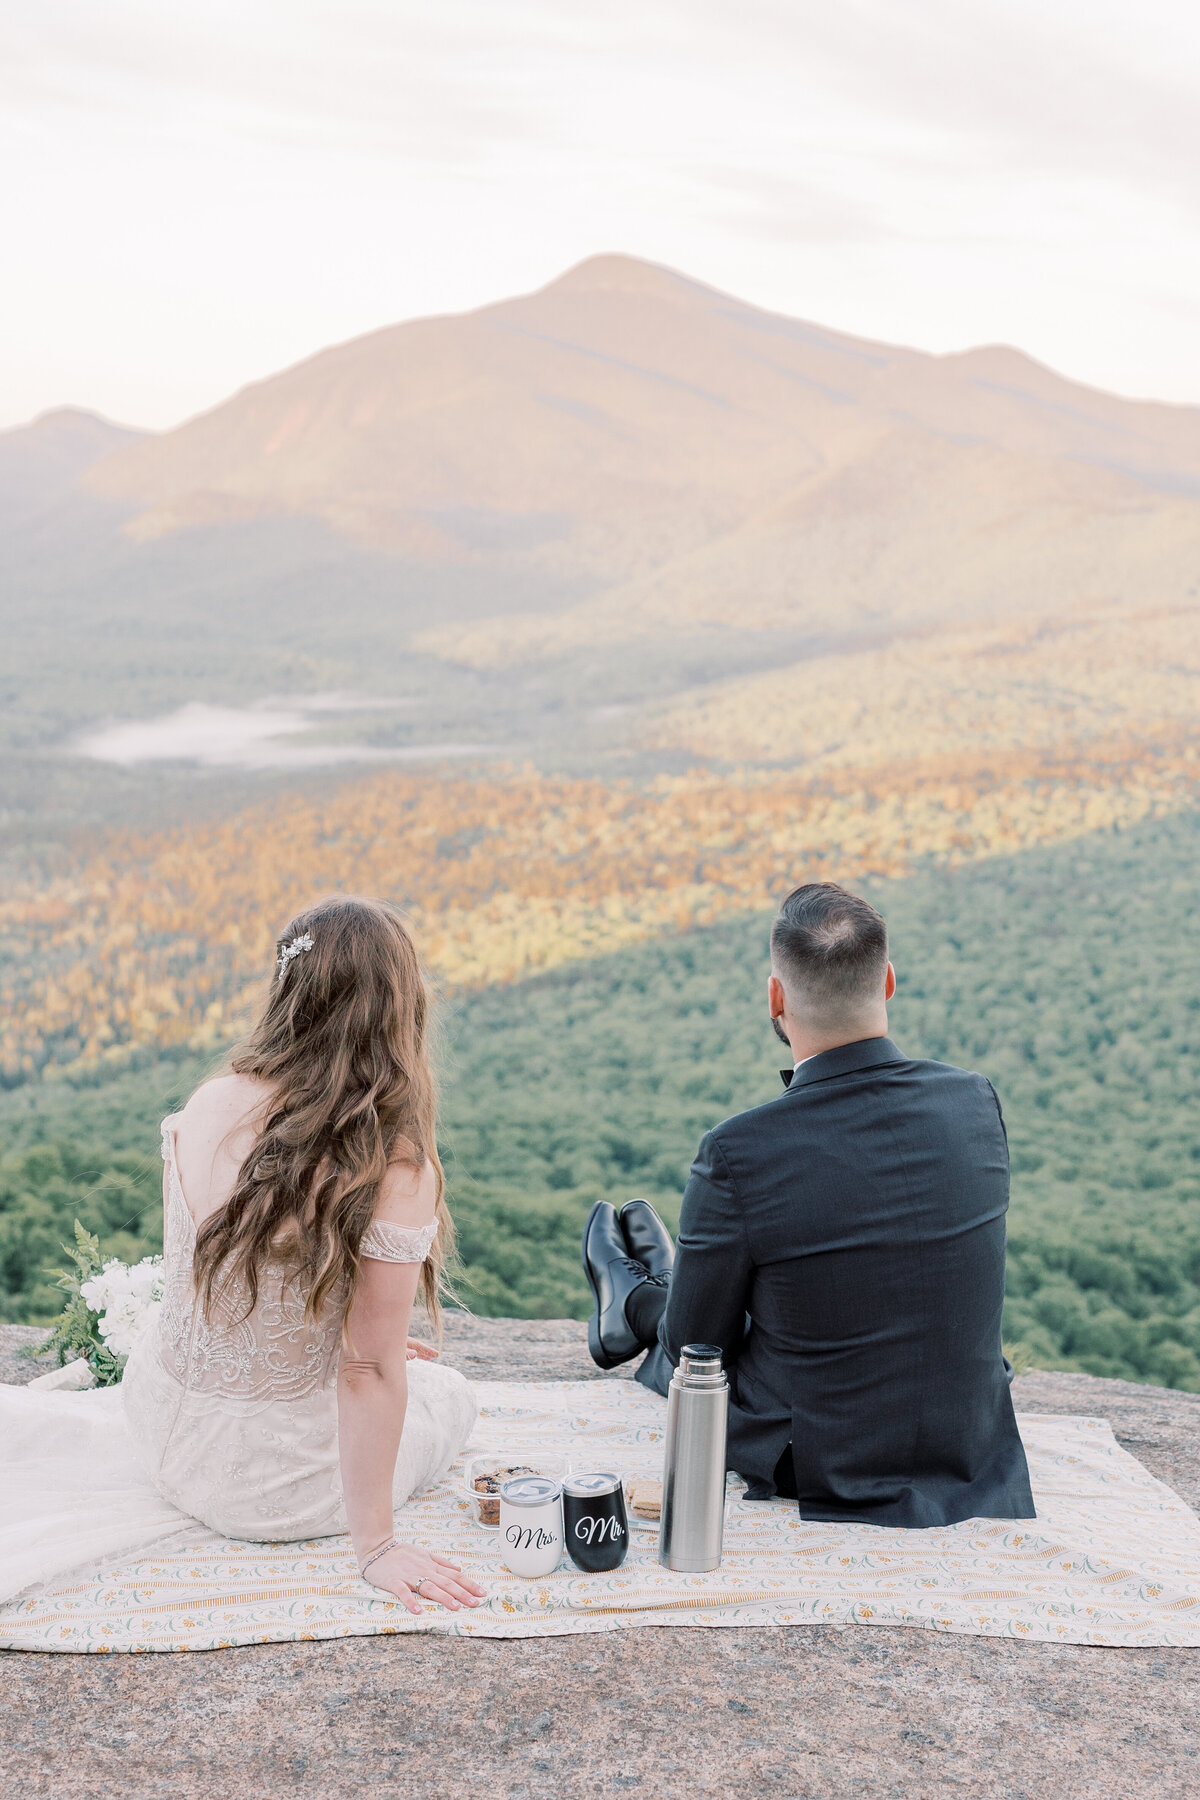 Bride and Groom watching the sunrise over the Adirondack Mountains while sharing a breakfast picnic on their wedding day.